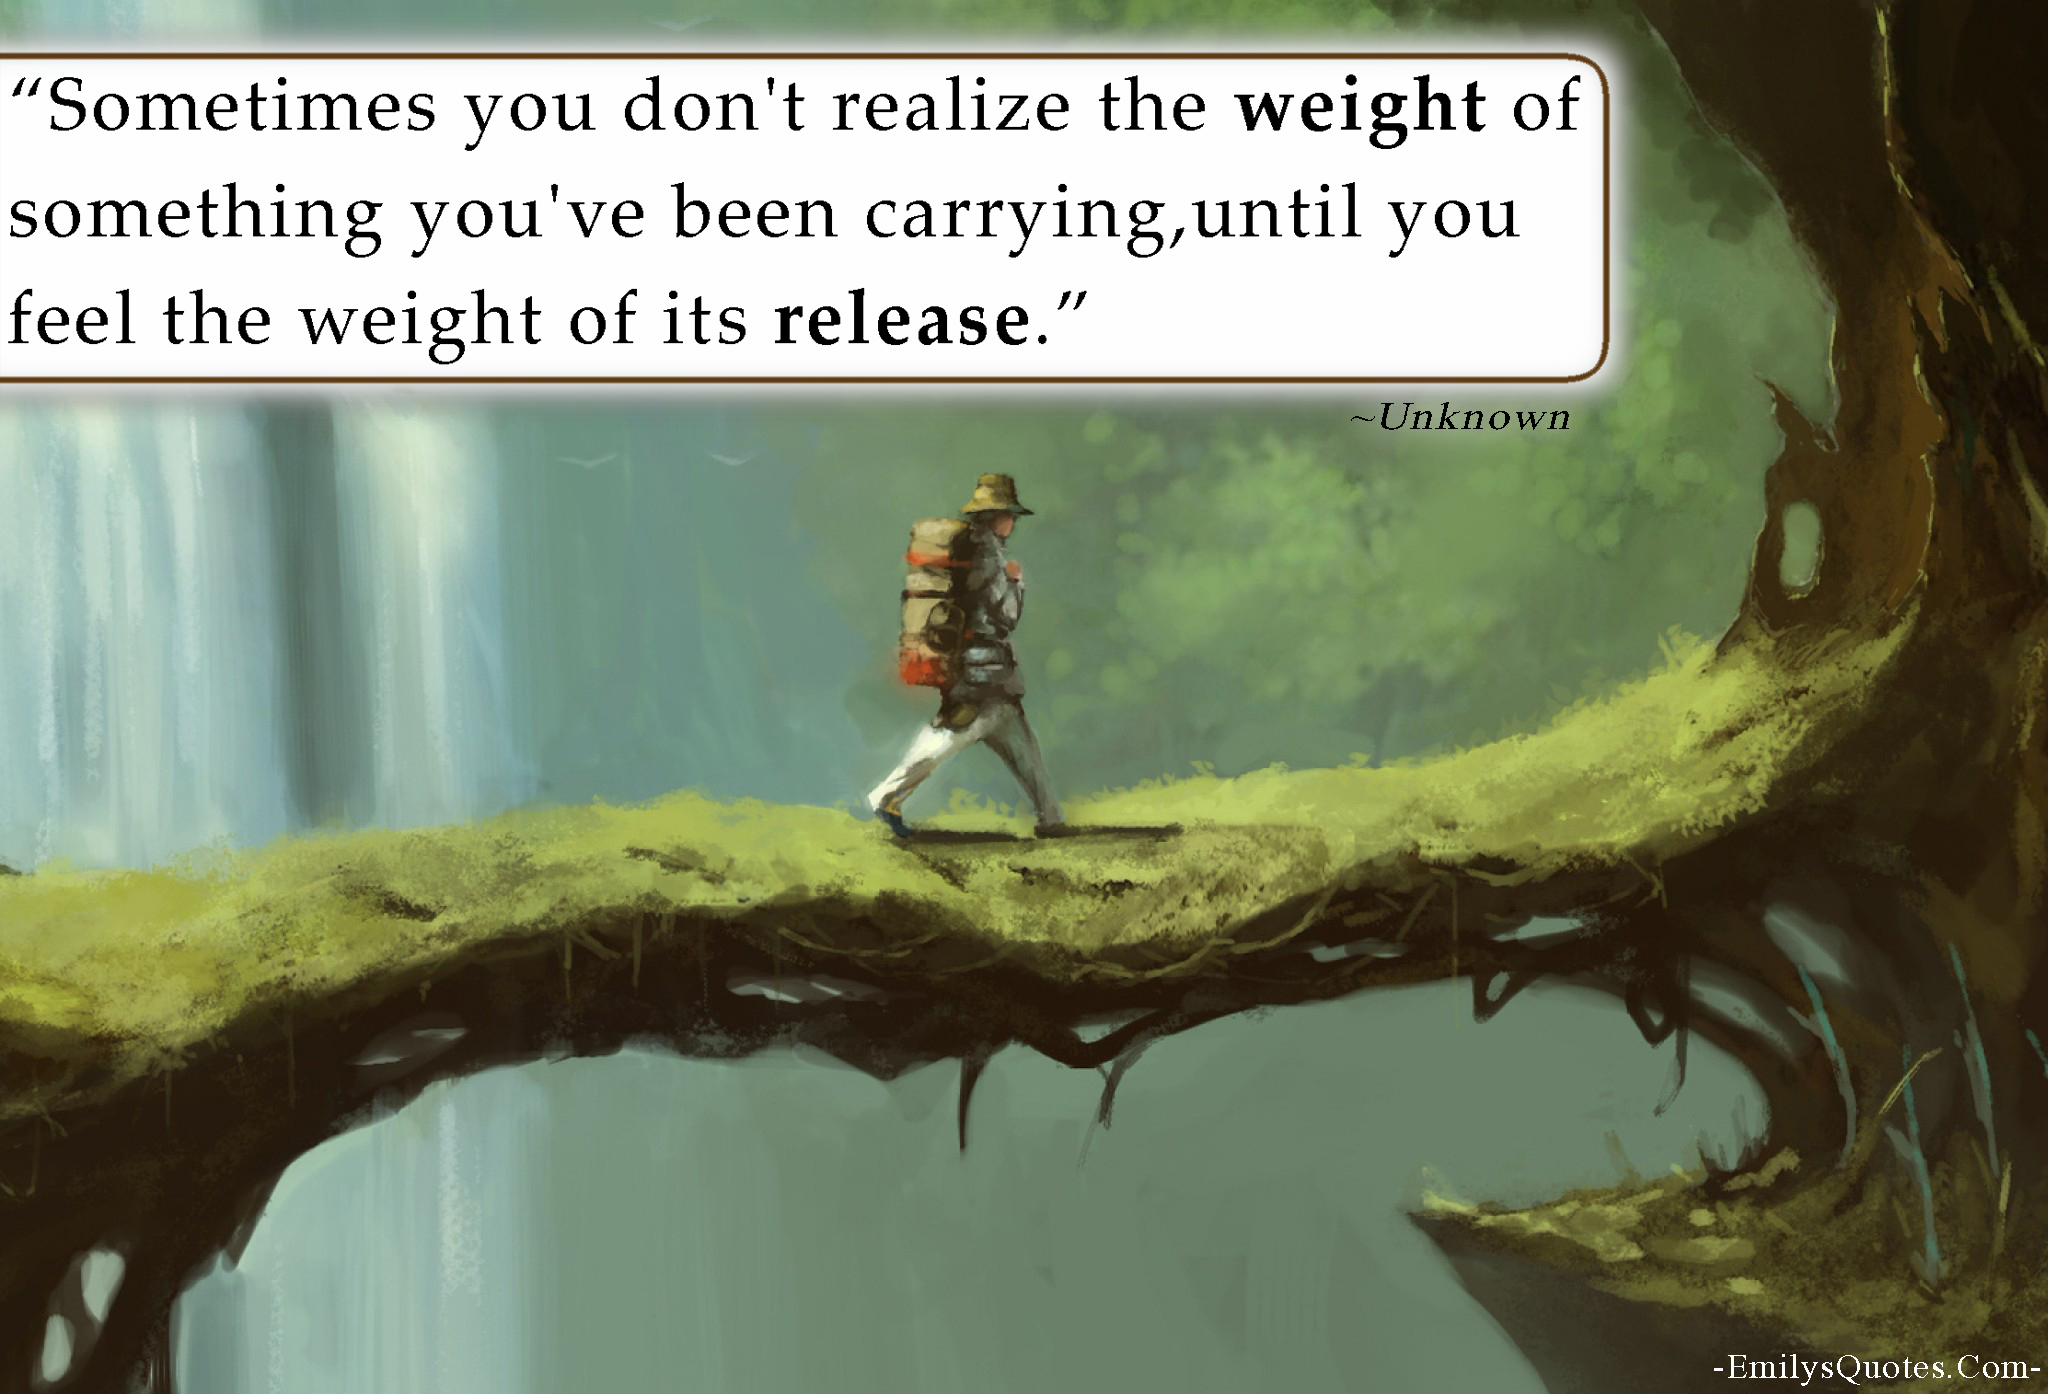 Sometimes you don’t realize the weight of something you’ve been